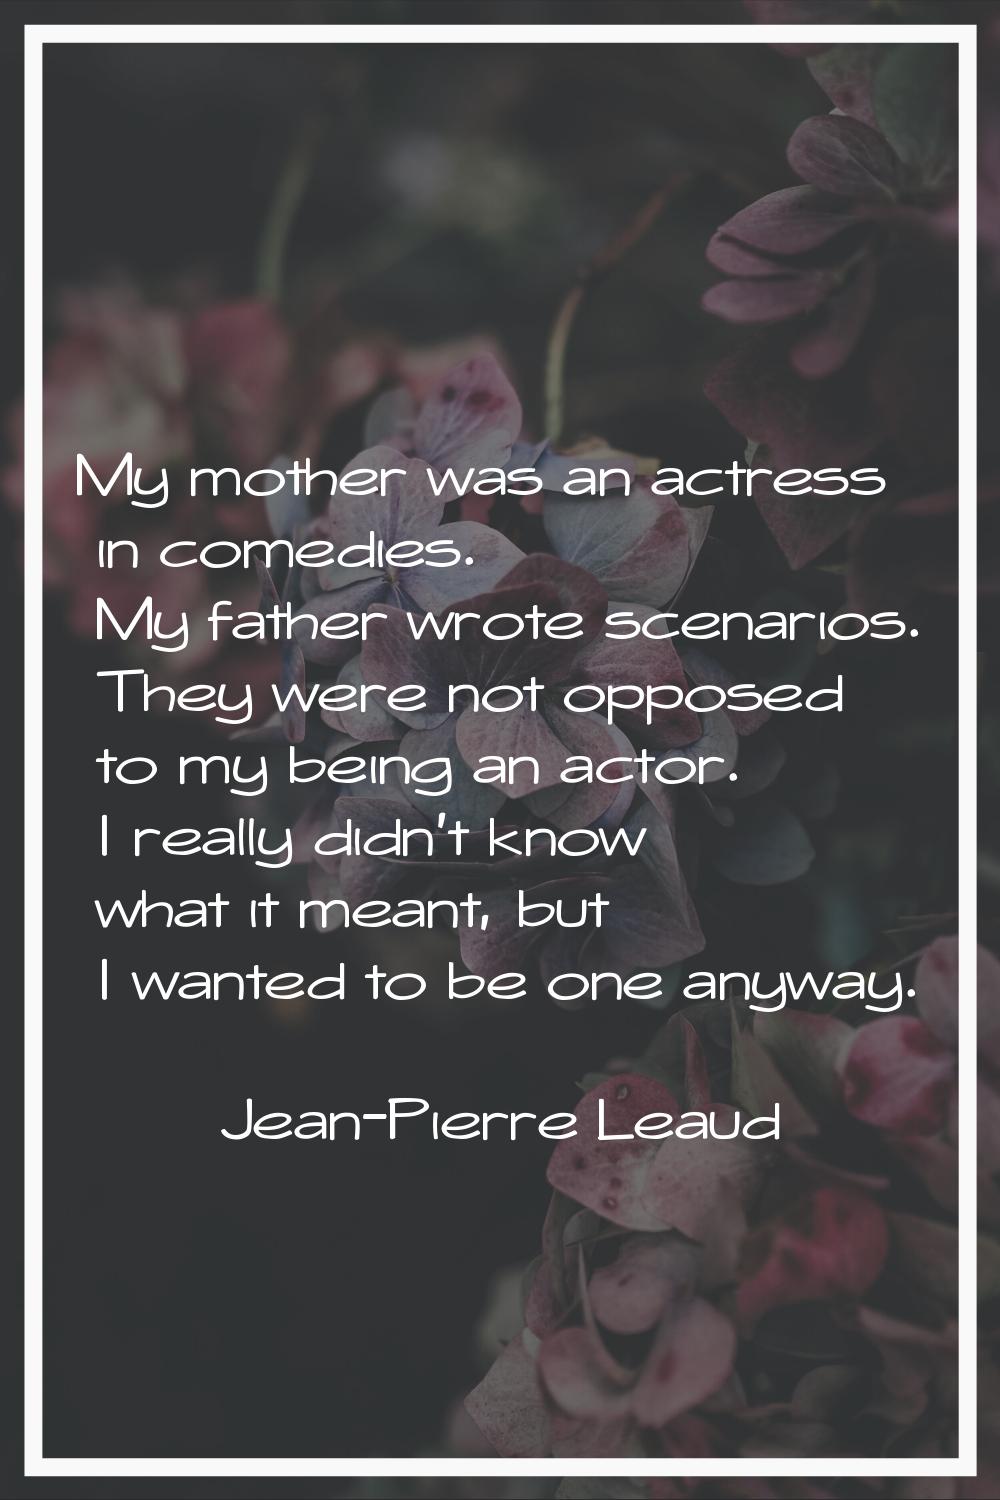 My mother was an actress in comedies. My father wrote scenarios. They were not opposed to my being 